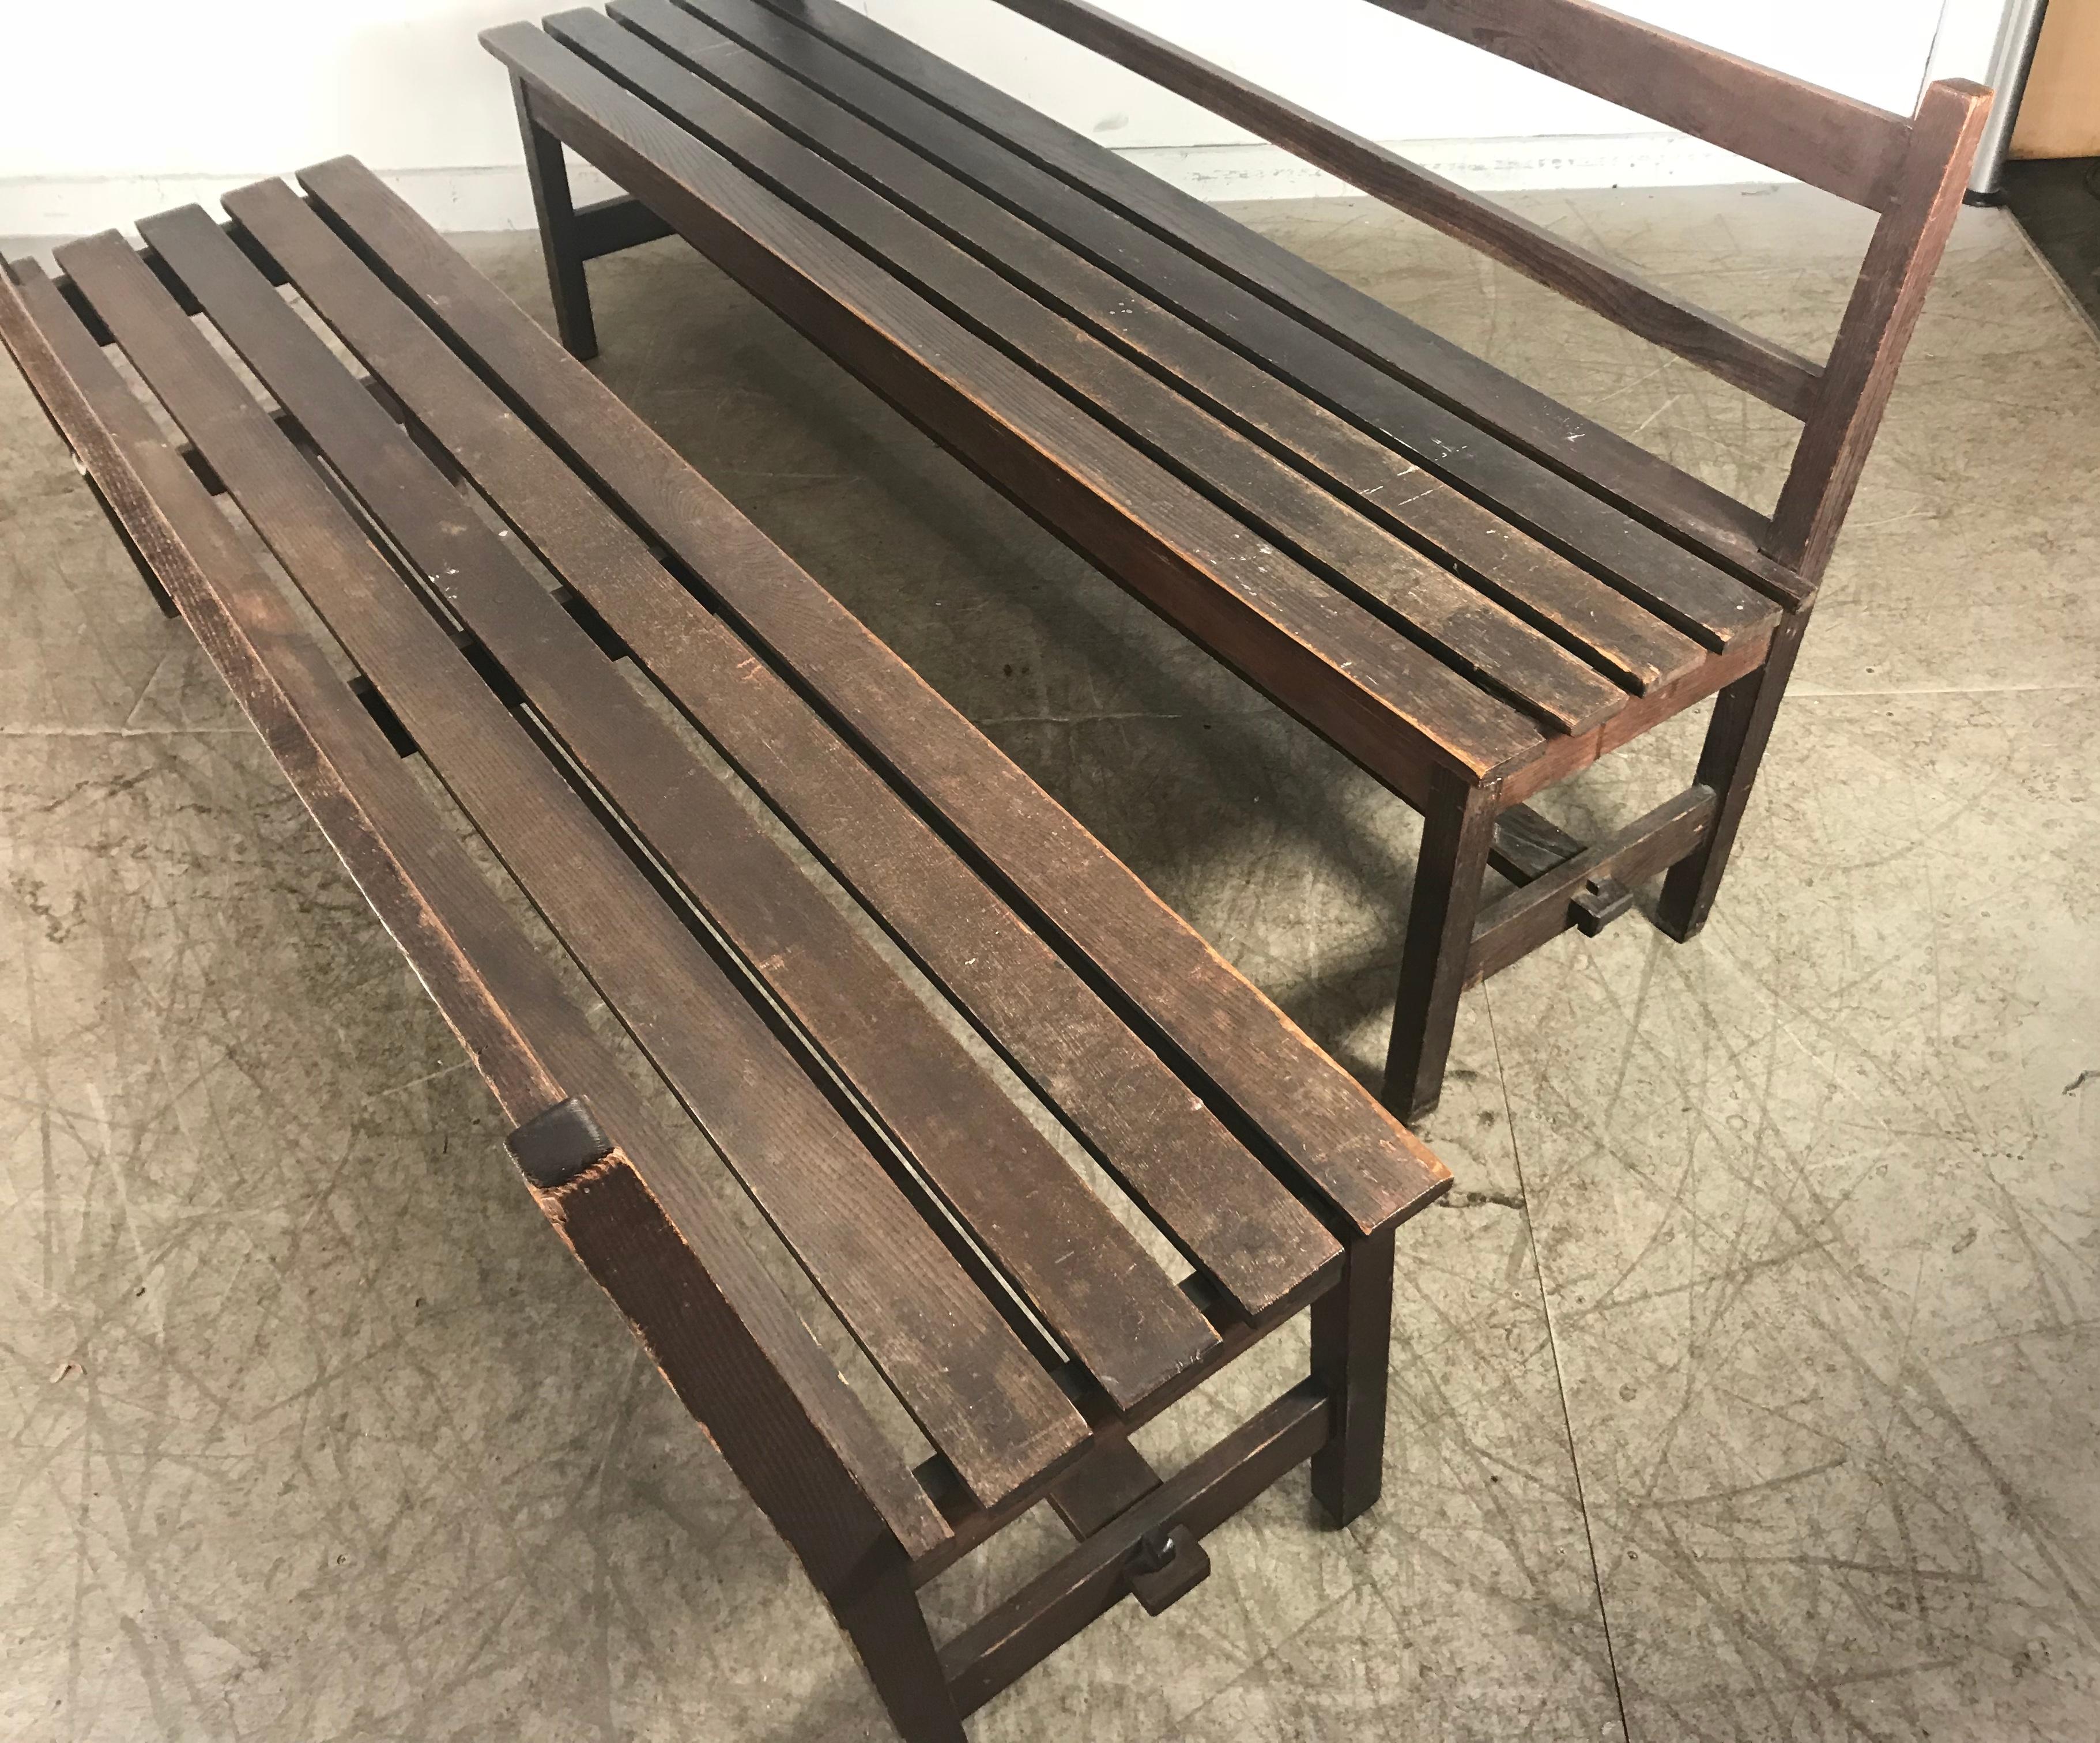 Rare Pair of Roycroft Oak Benches, Inventory Number from the Inn, circa 1905 For Sale 3